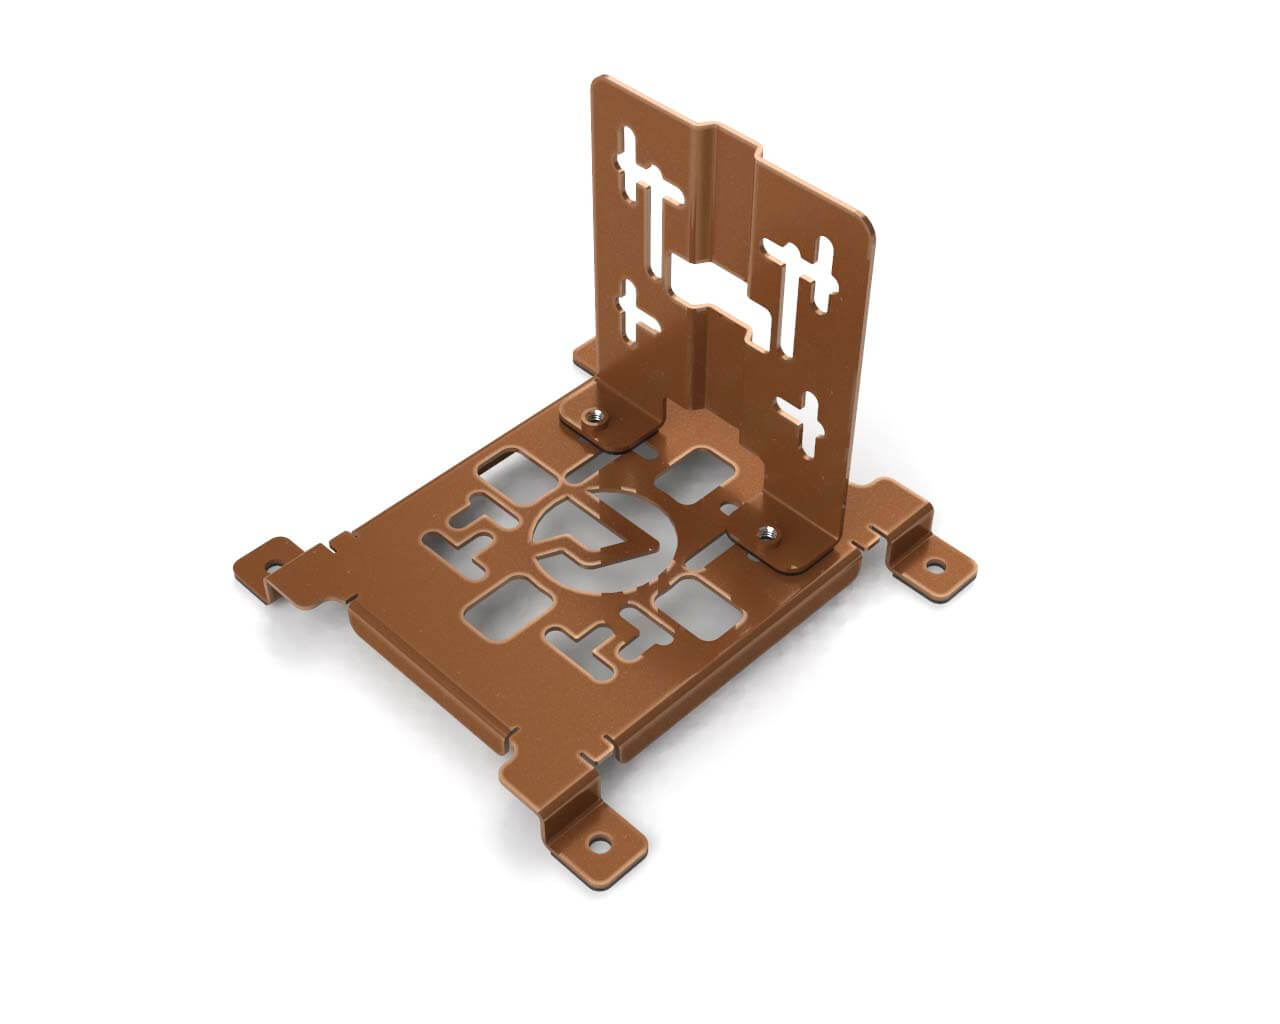 PrimoChill SX Universal Spider Mount Bracket Kit - 120mm Series - PrimoChill - KEEPING IT COOL Copper